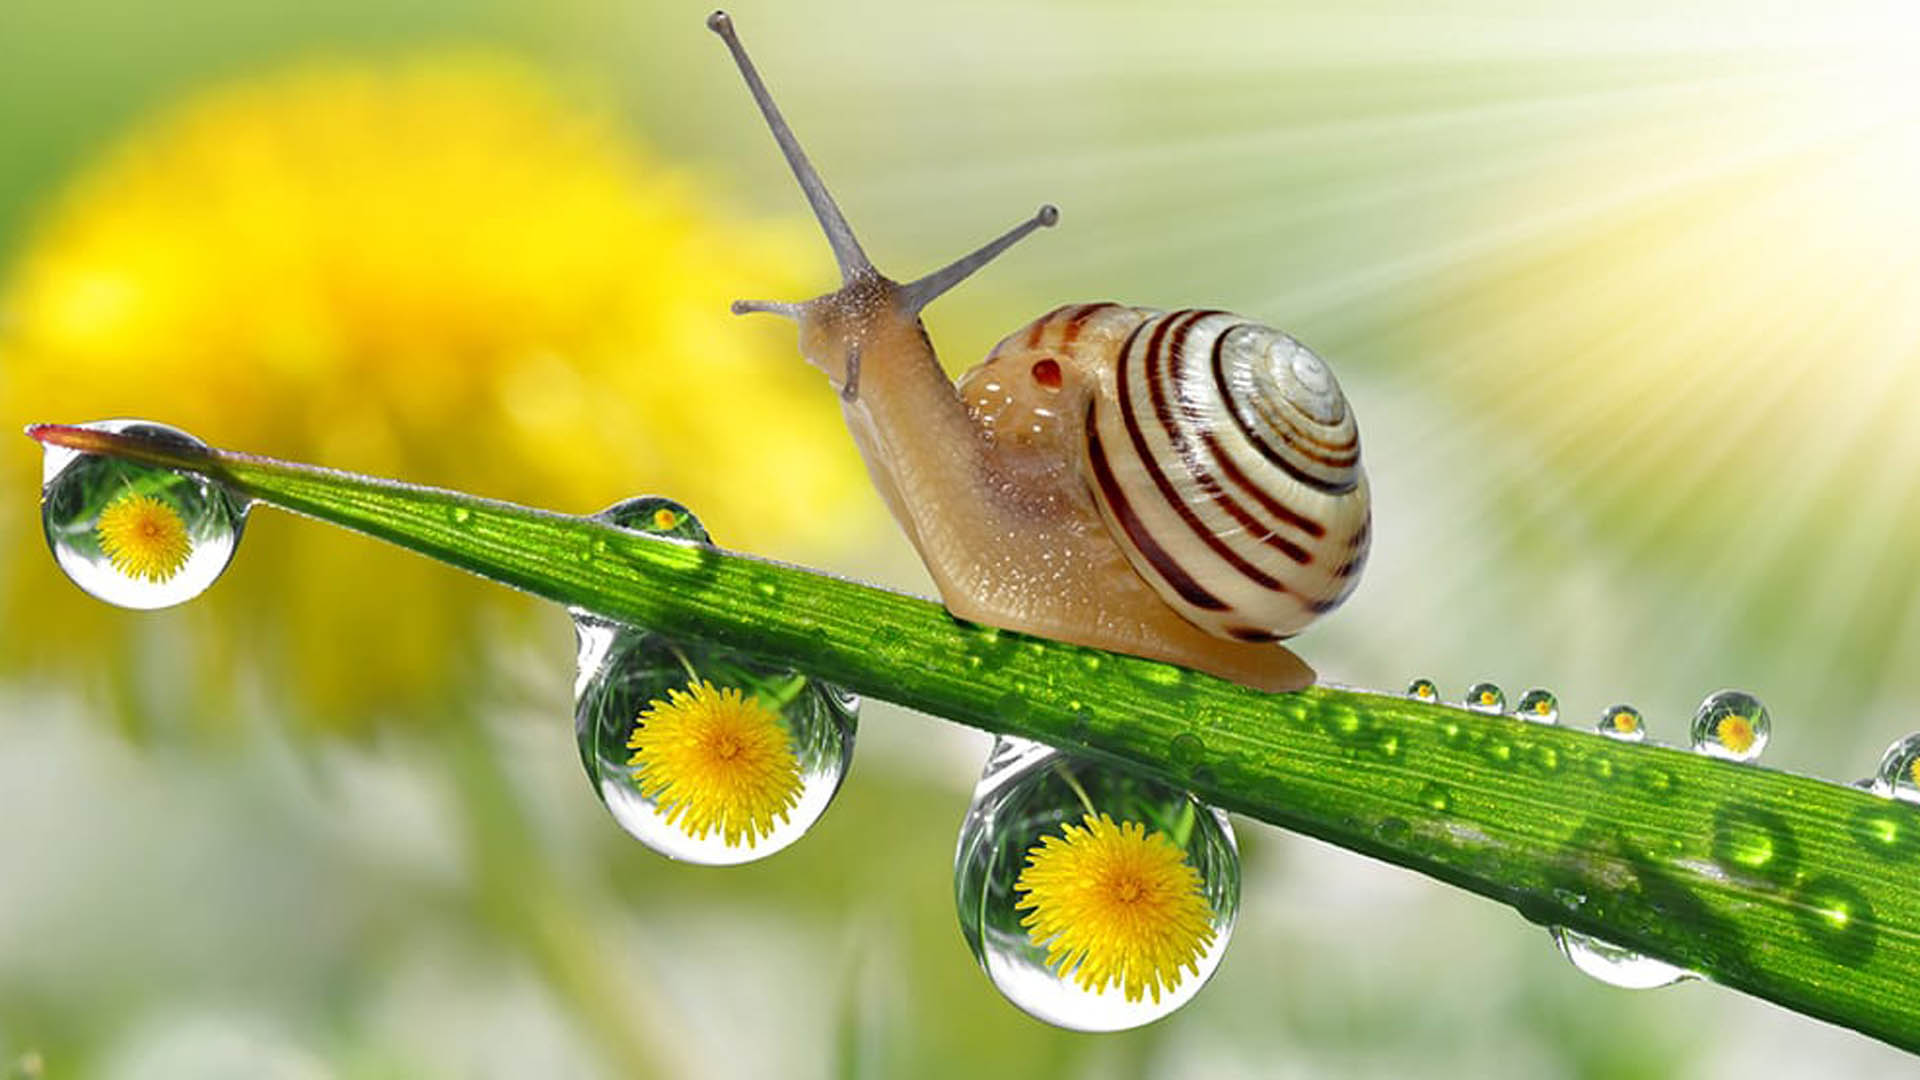 Snails With Water Droplets Up Close Wallpaper Hd , HD Wallpaper & Backgrounds